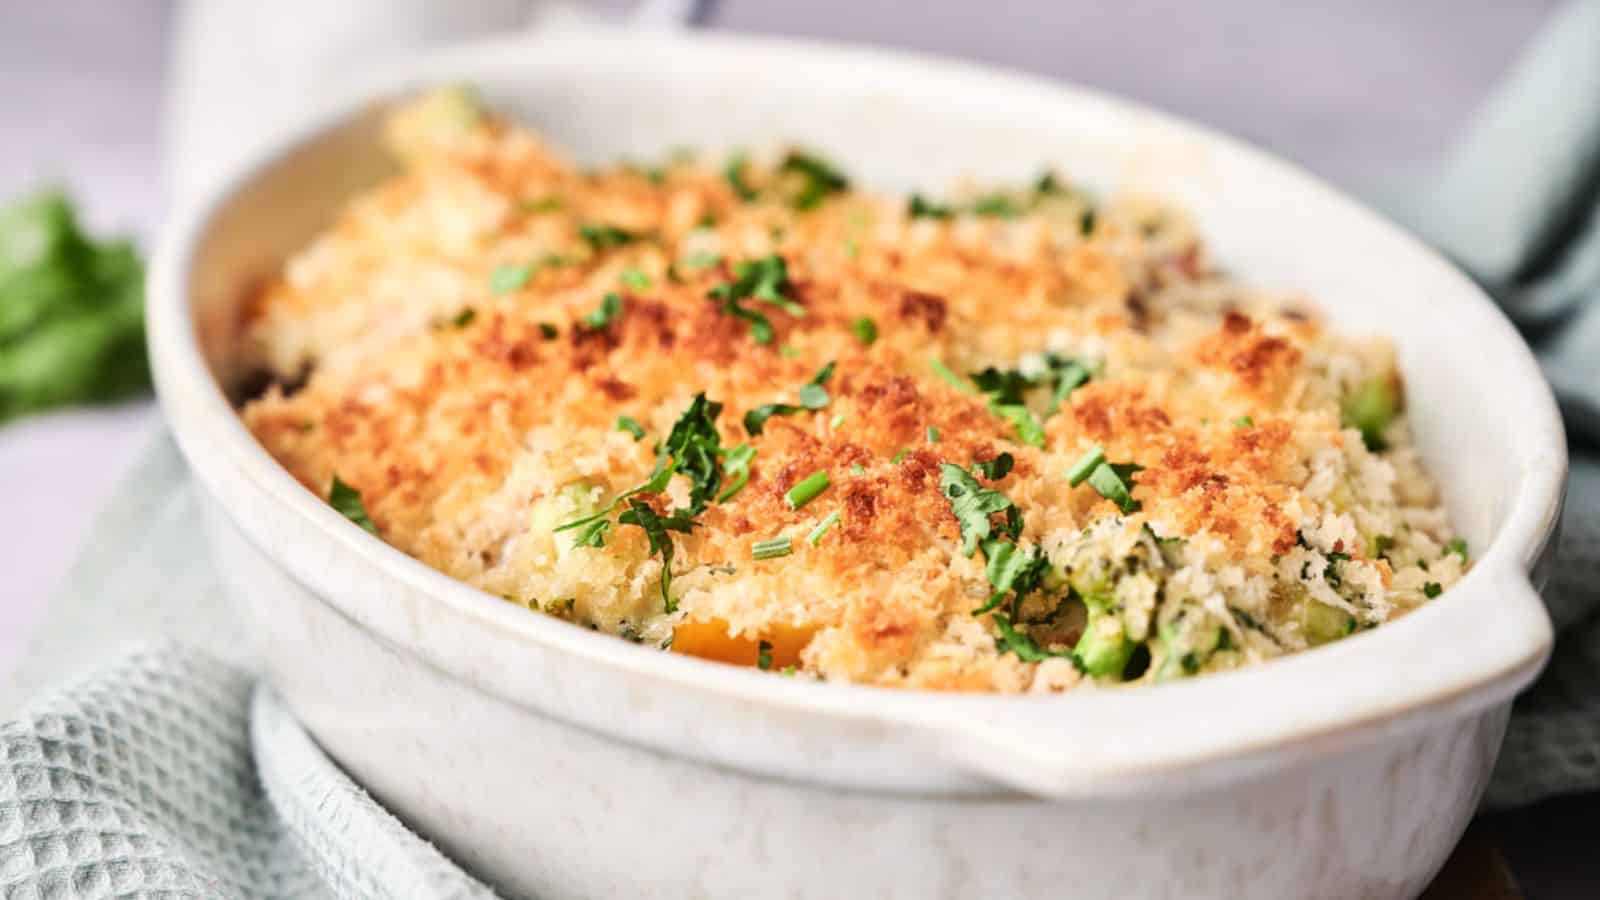 A baked casserole with a golden breadcrumb topping, garnished with fresh herbs.